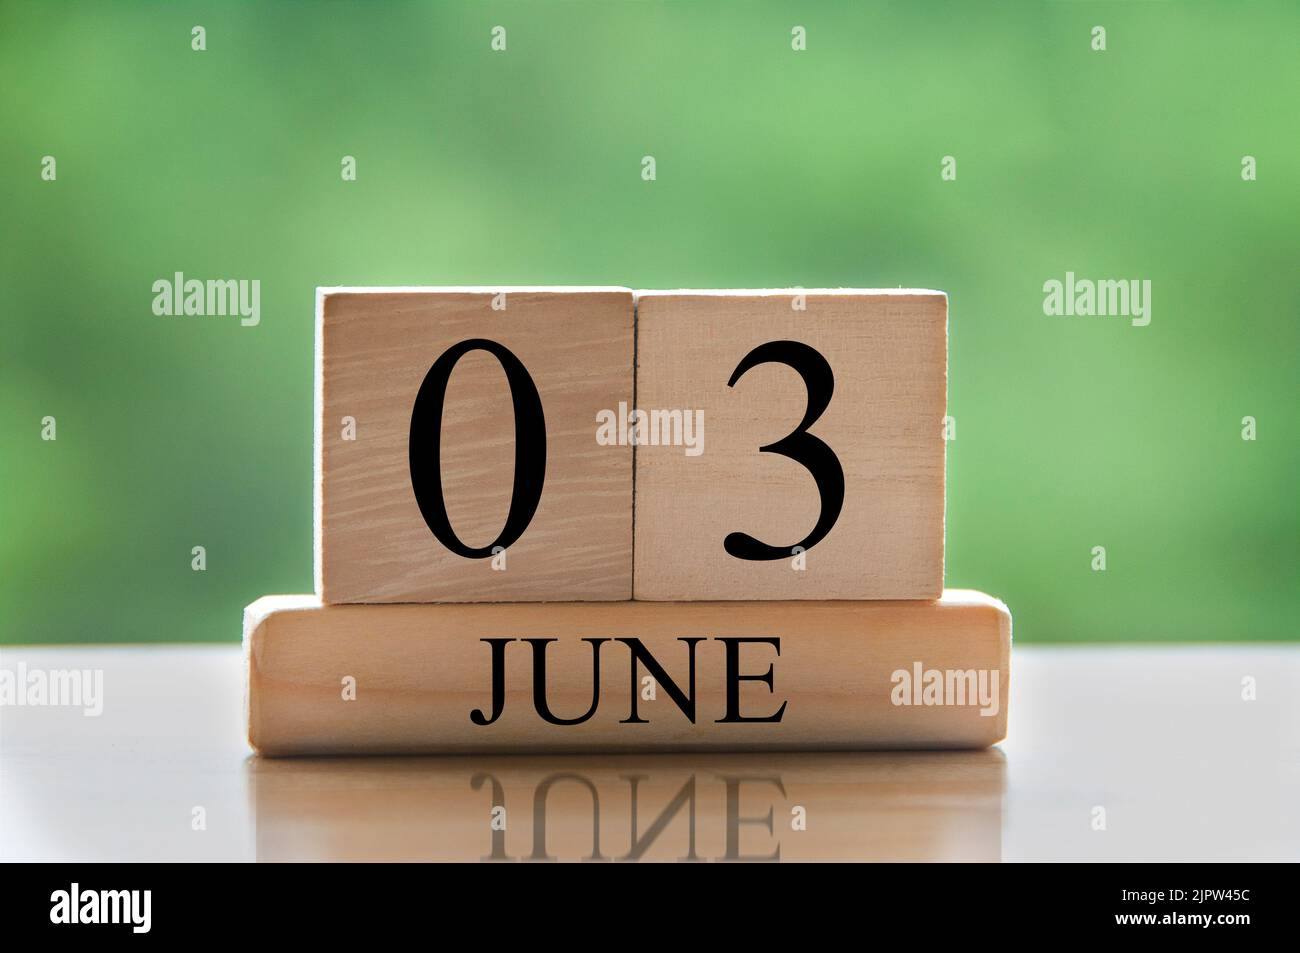 June 3 calendar date text on wooden blocks with blurred nature background. Copy space and calendar concept. Stock Photo